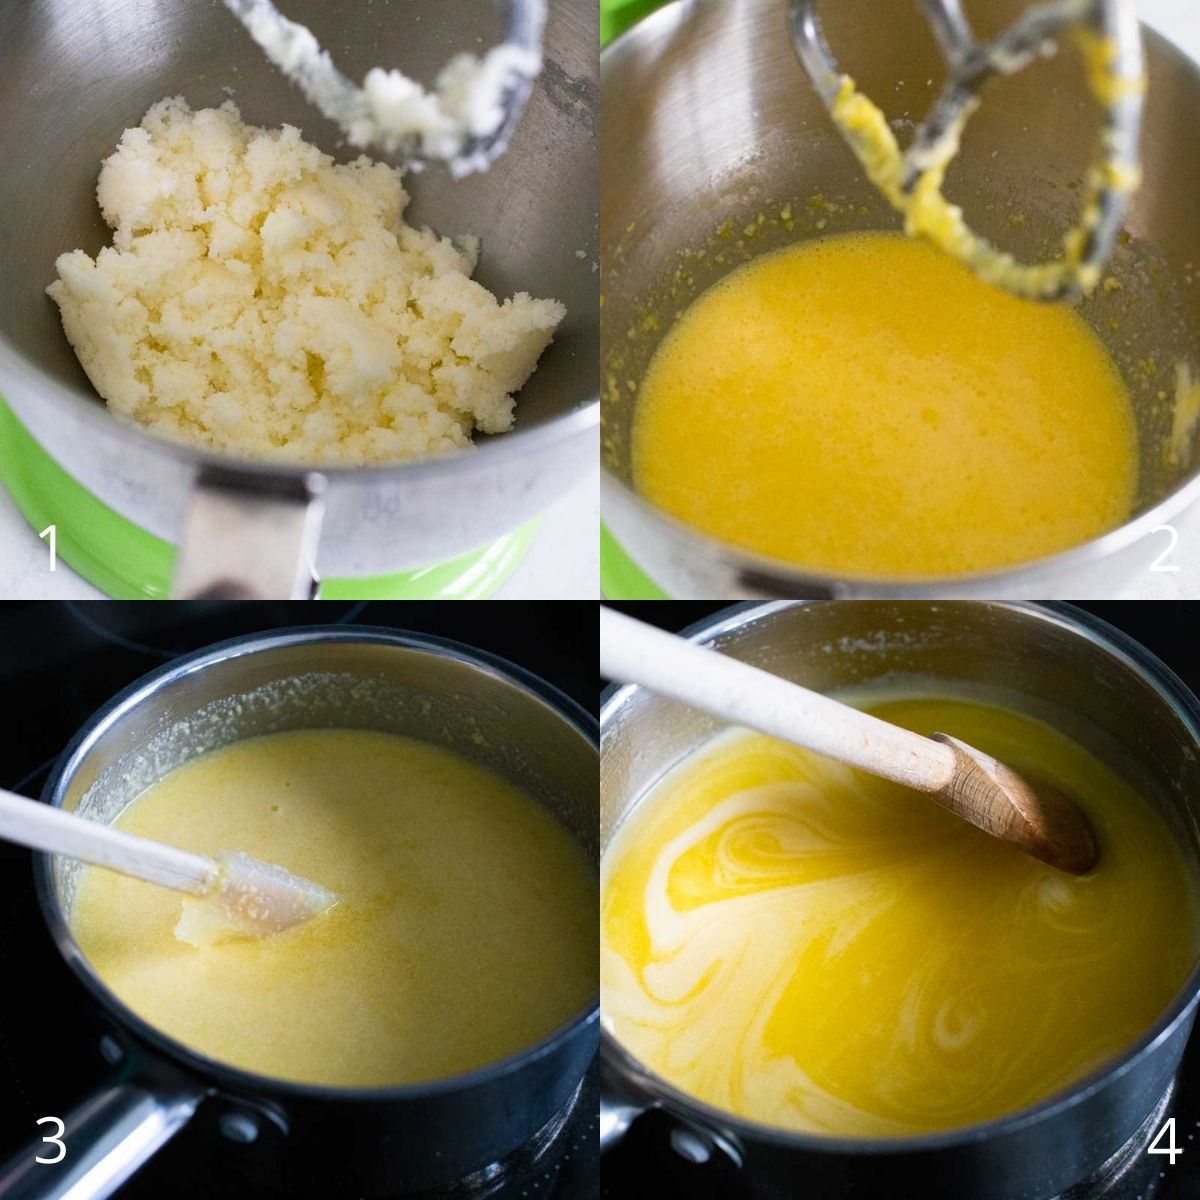 Step by Step Photos show how to prepare the lemon curd.